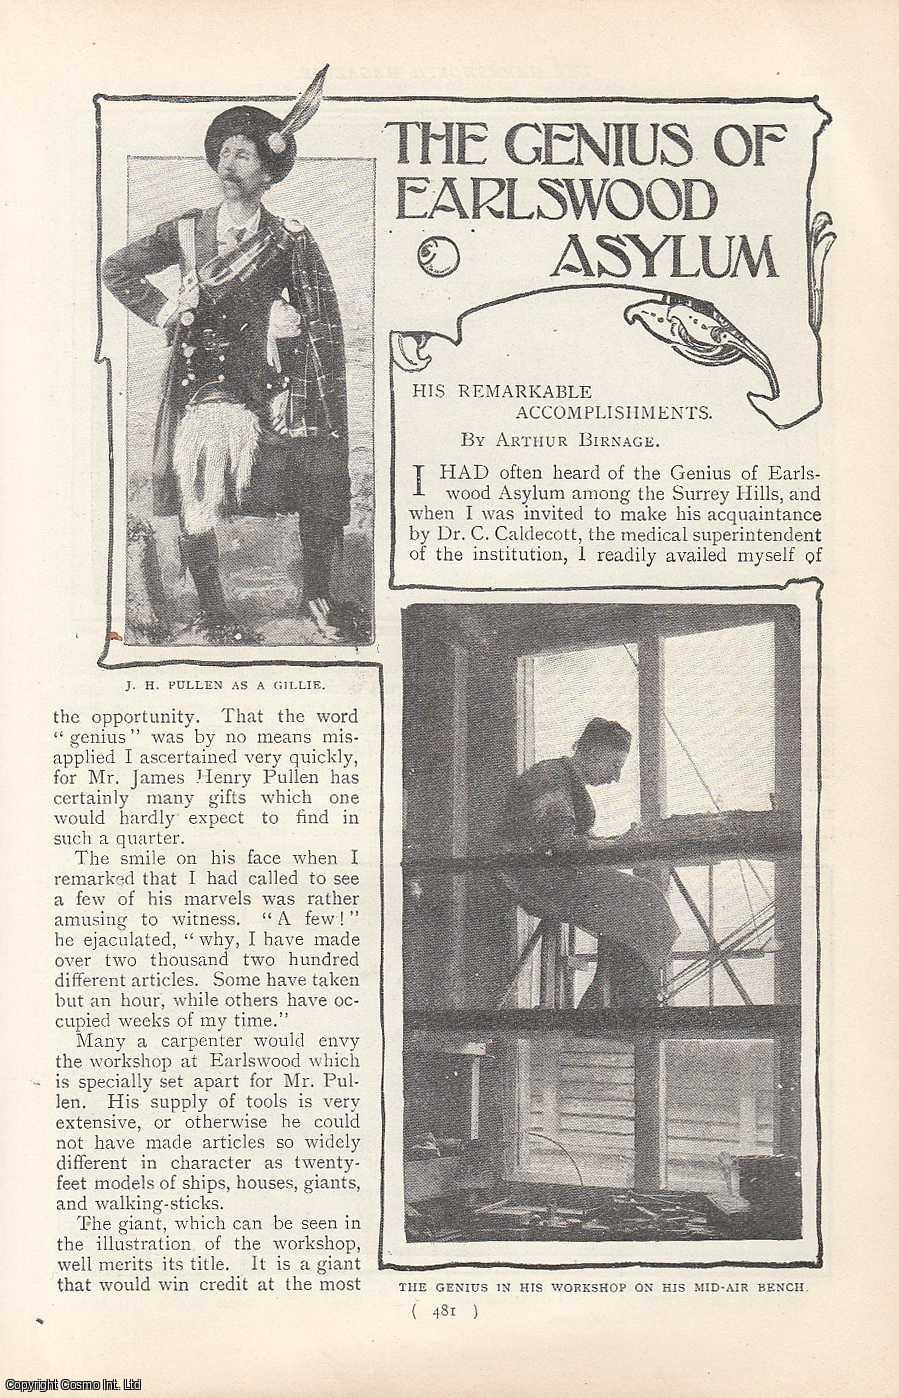 Arthur Birnage - The Genius of Earlswood Asylum : His Remarkable Accomplishments. An uncommon original article from the Harmsworth London Magazine, 1901.